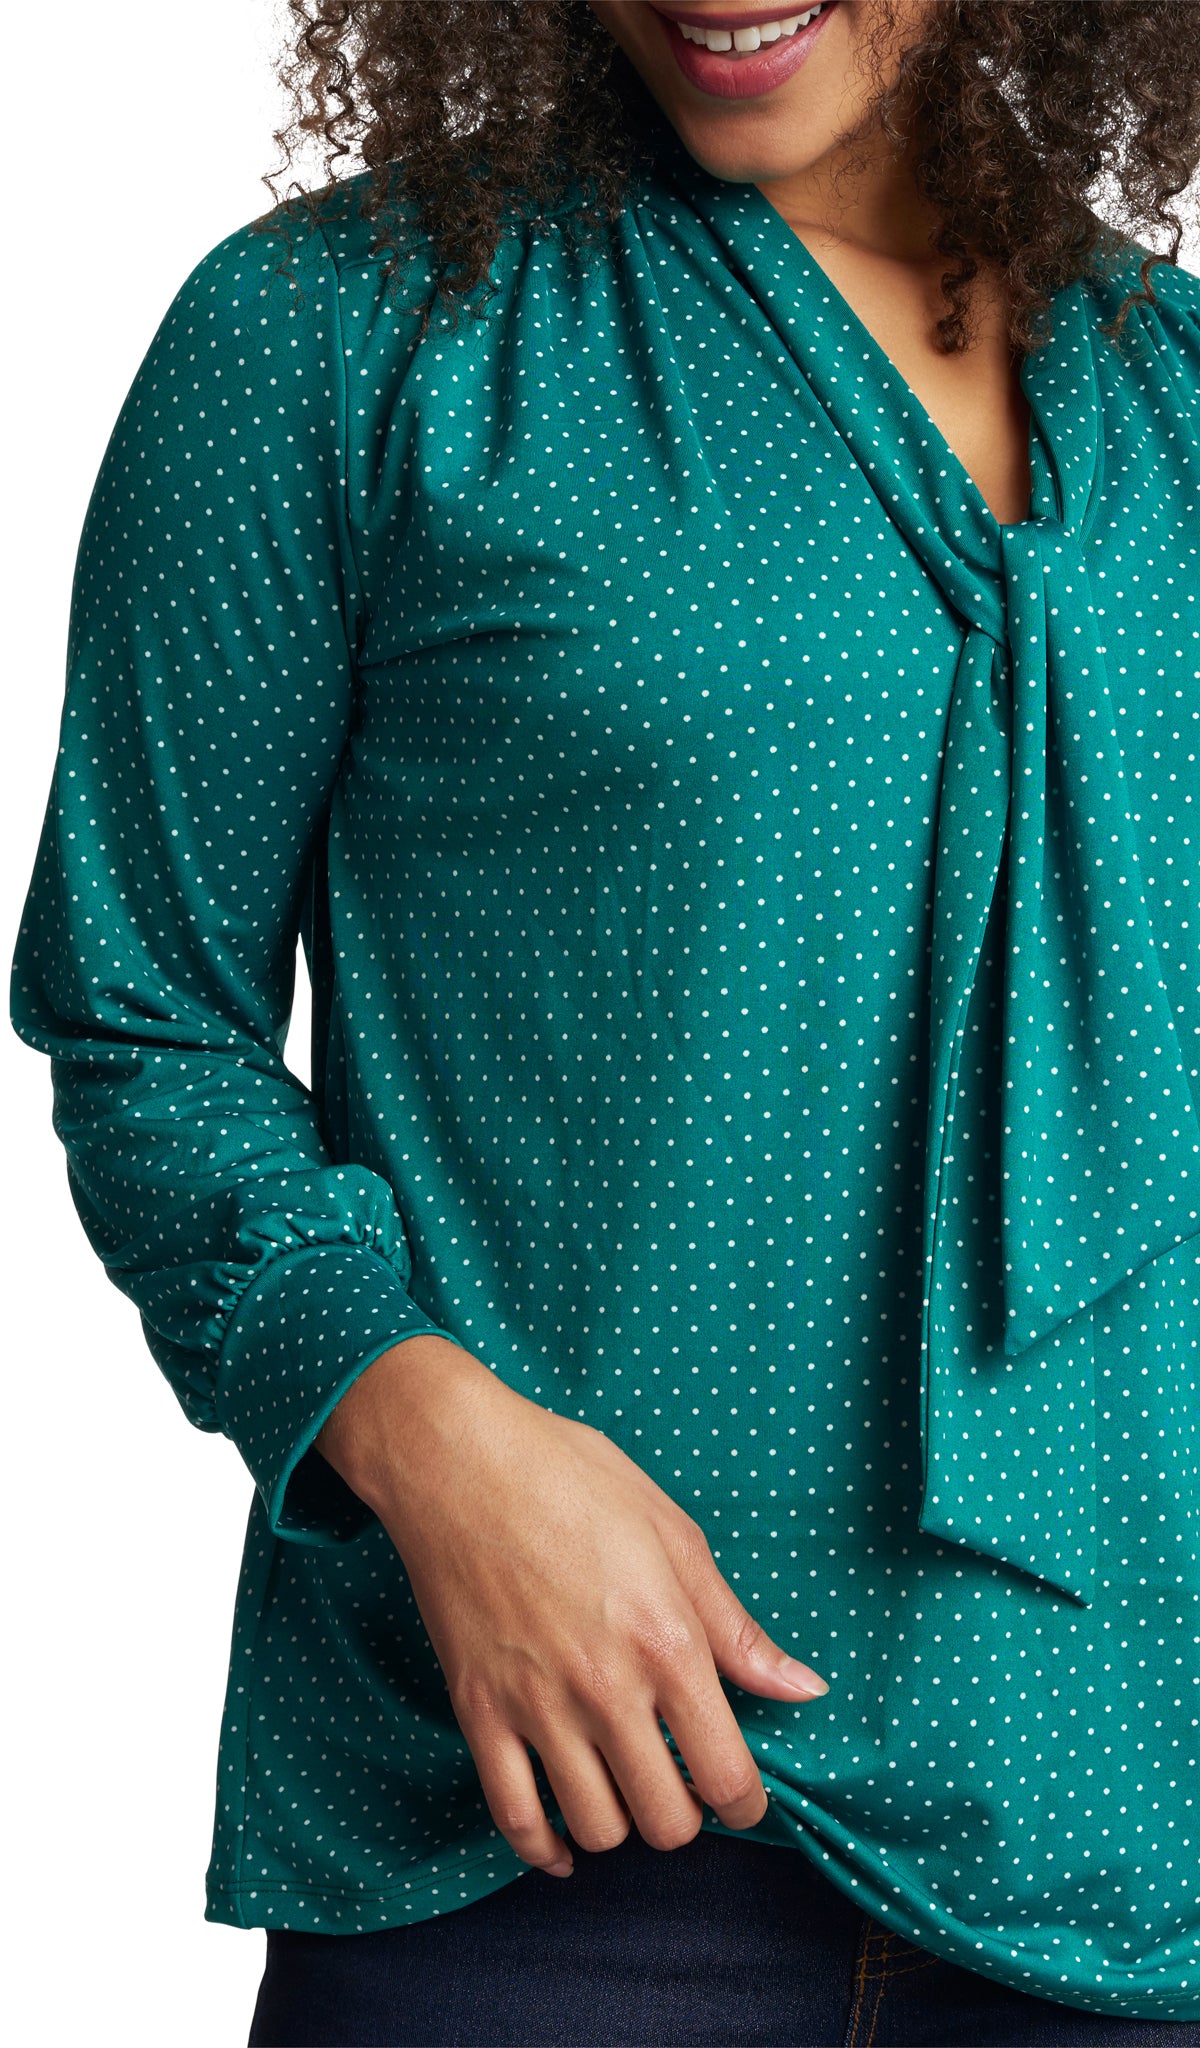 Emerald Dot Vanessa detail shot of woman pulling up front layer to access knit jersey nursing panel underneath.